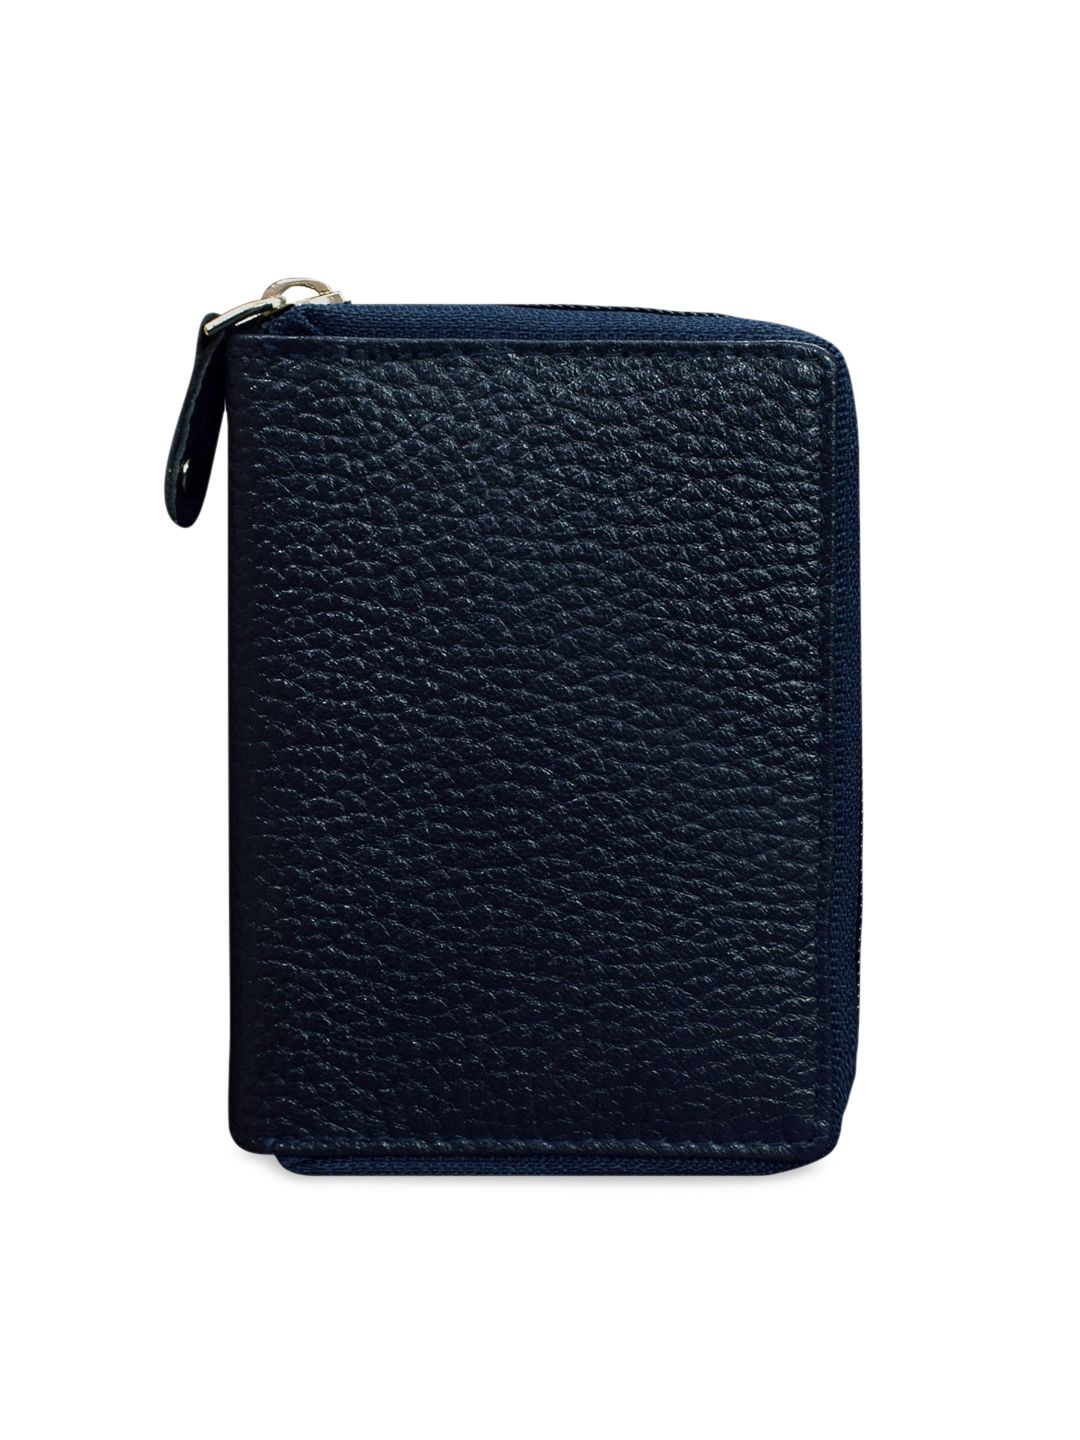 ABYS Unisex Navy Blue Textured Genuine Leather Card Holder Price in India